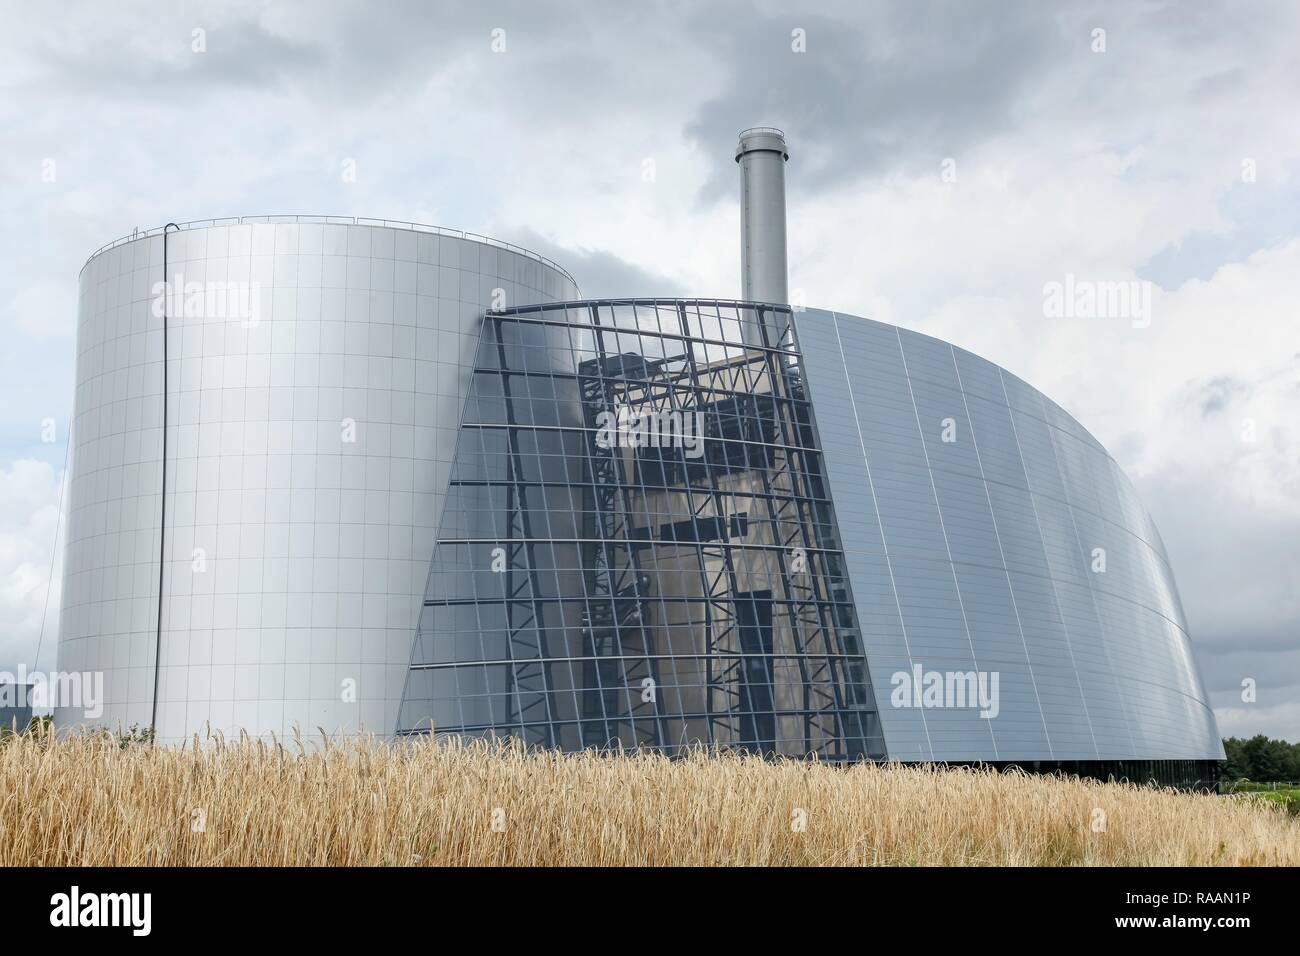 Viborg, Denmark - August 27, 2015: Viborg Power Station is a natural gas-fired power station operated by Energi Viborg in Viborg, Denmark Stock Photo